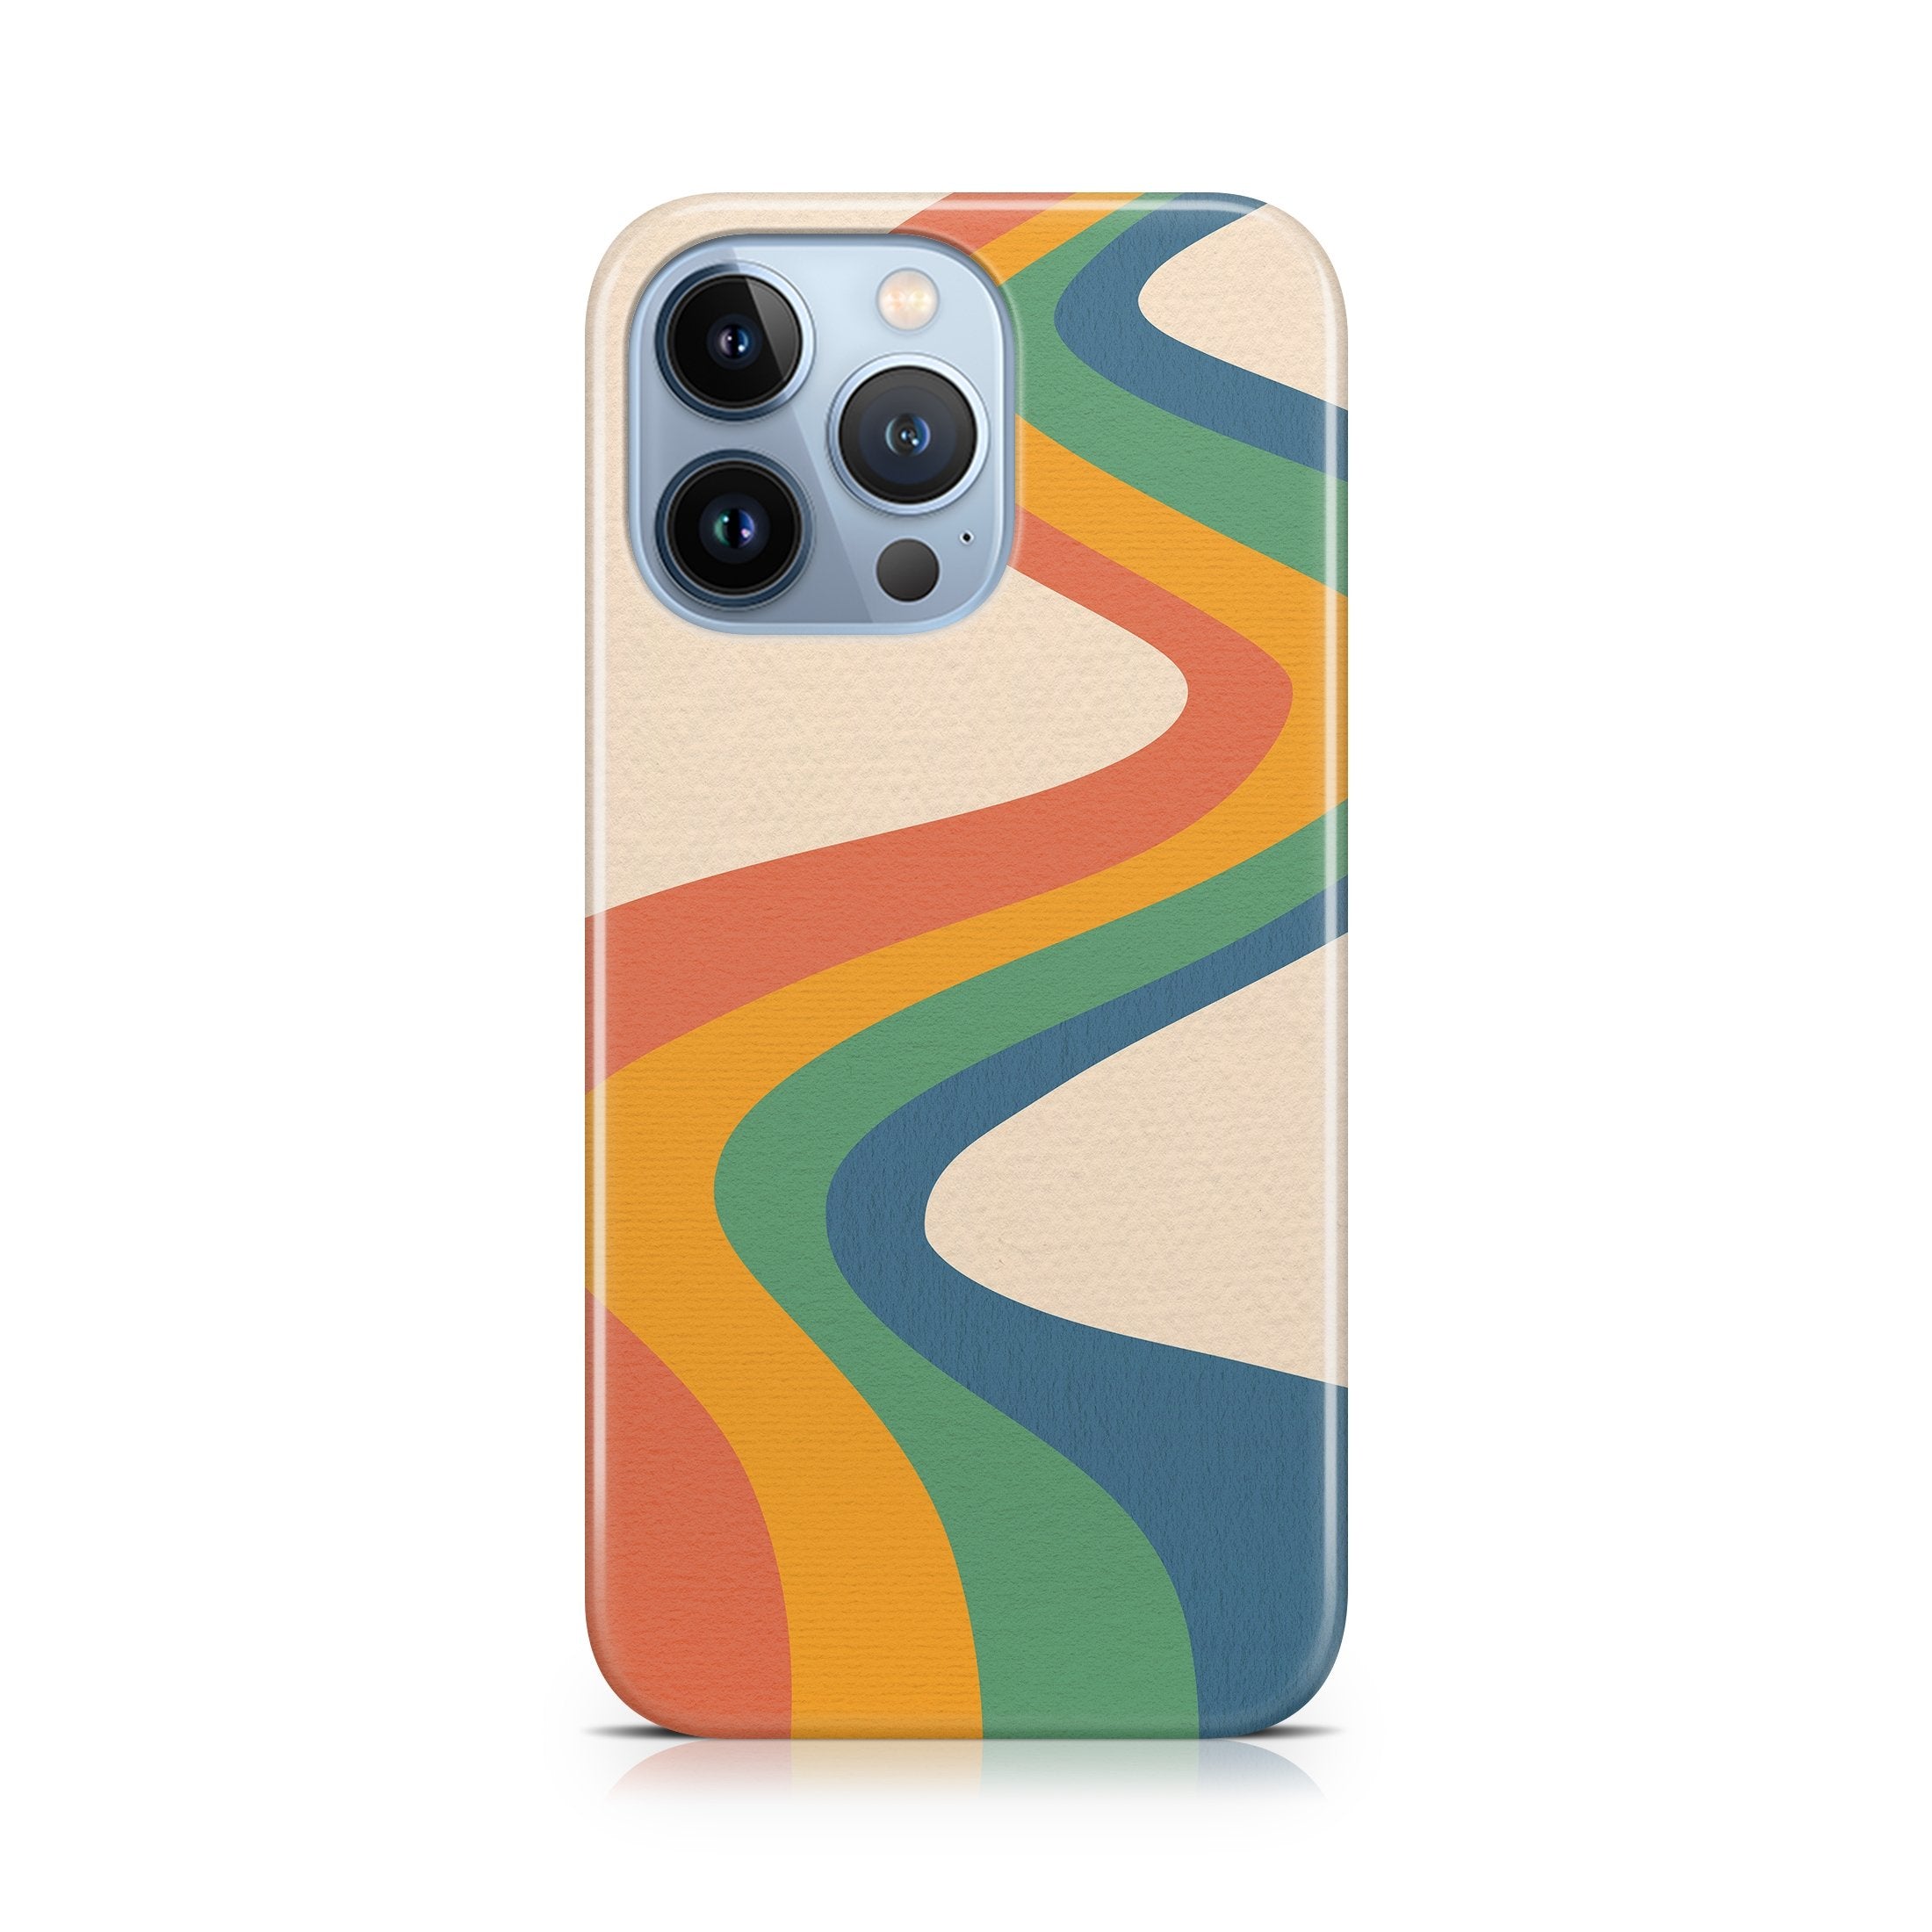 Slide into the Past - iPhone phone case designs by CaseSwagger